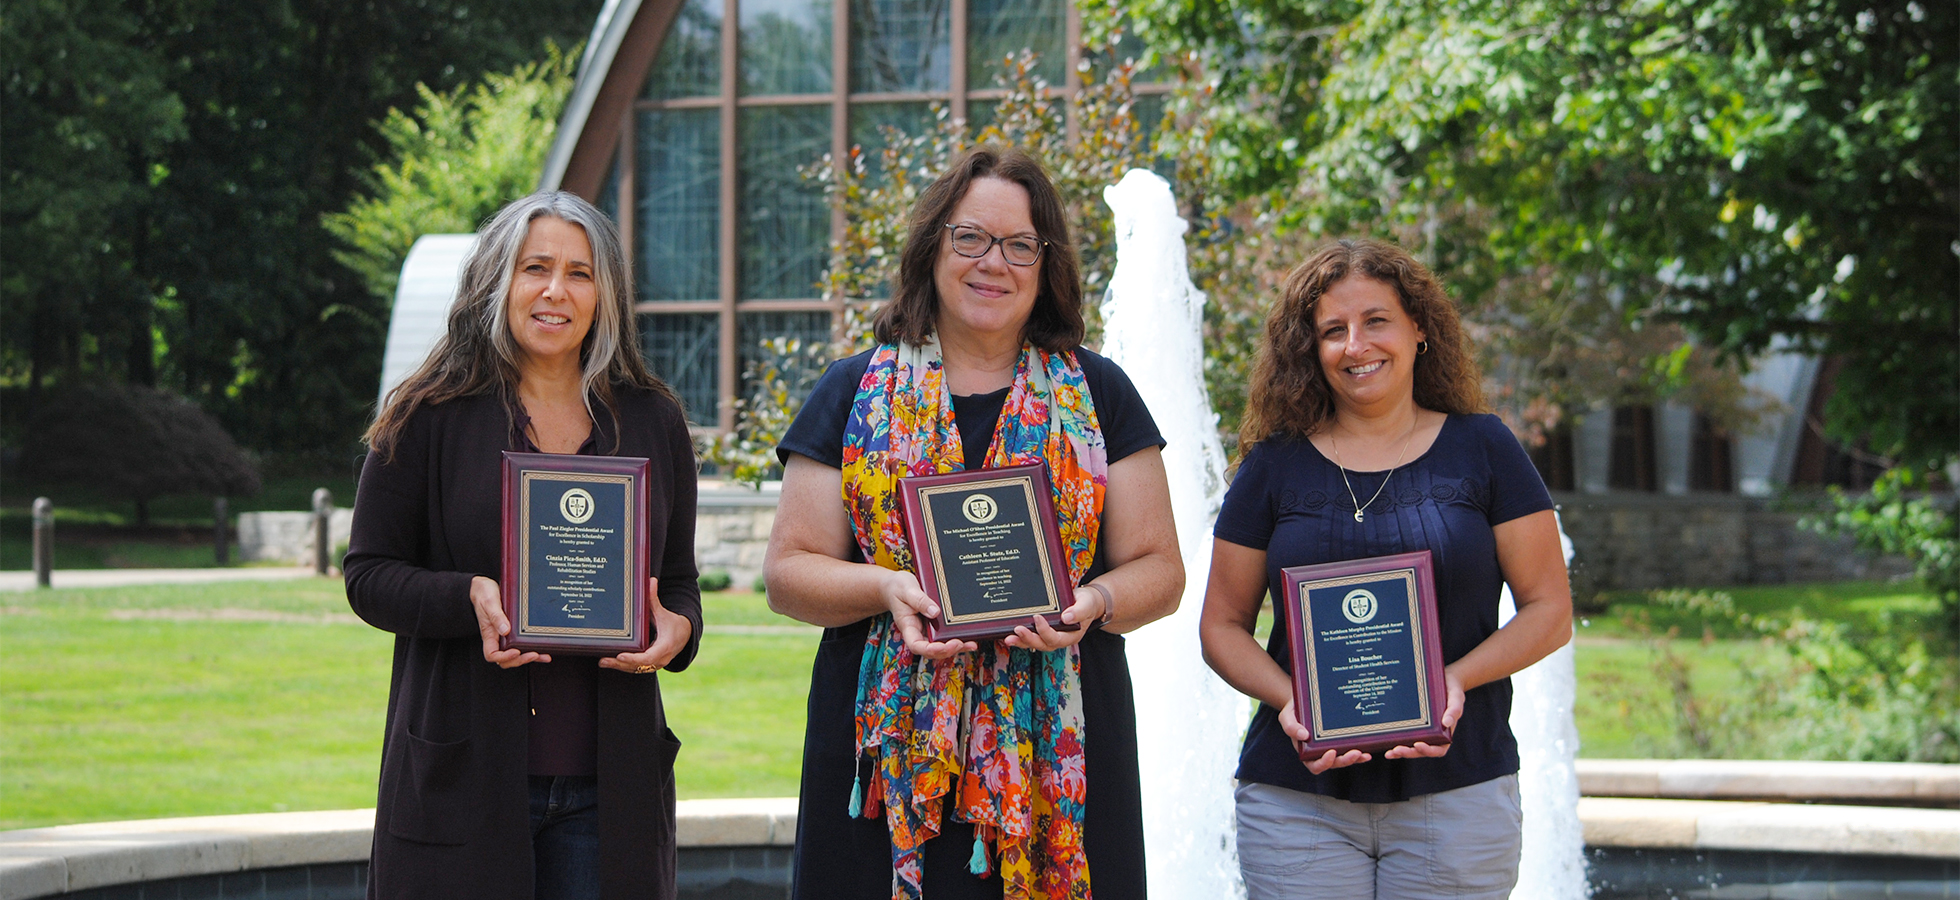 Assumption University's Cinzia Pica-Smith, Lisa Boucher, and Cathleen Stutz received the 2022 Assumption University Presidential Awards for their excellence in scholarship, teaching, and commitment to the mission of the University